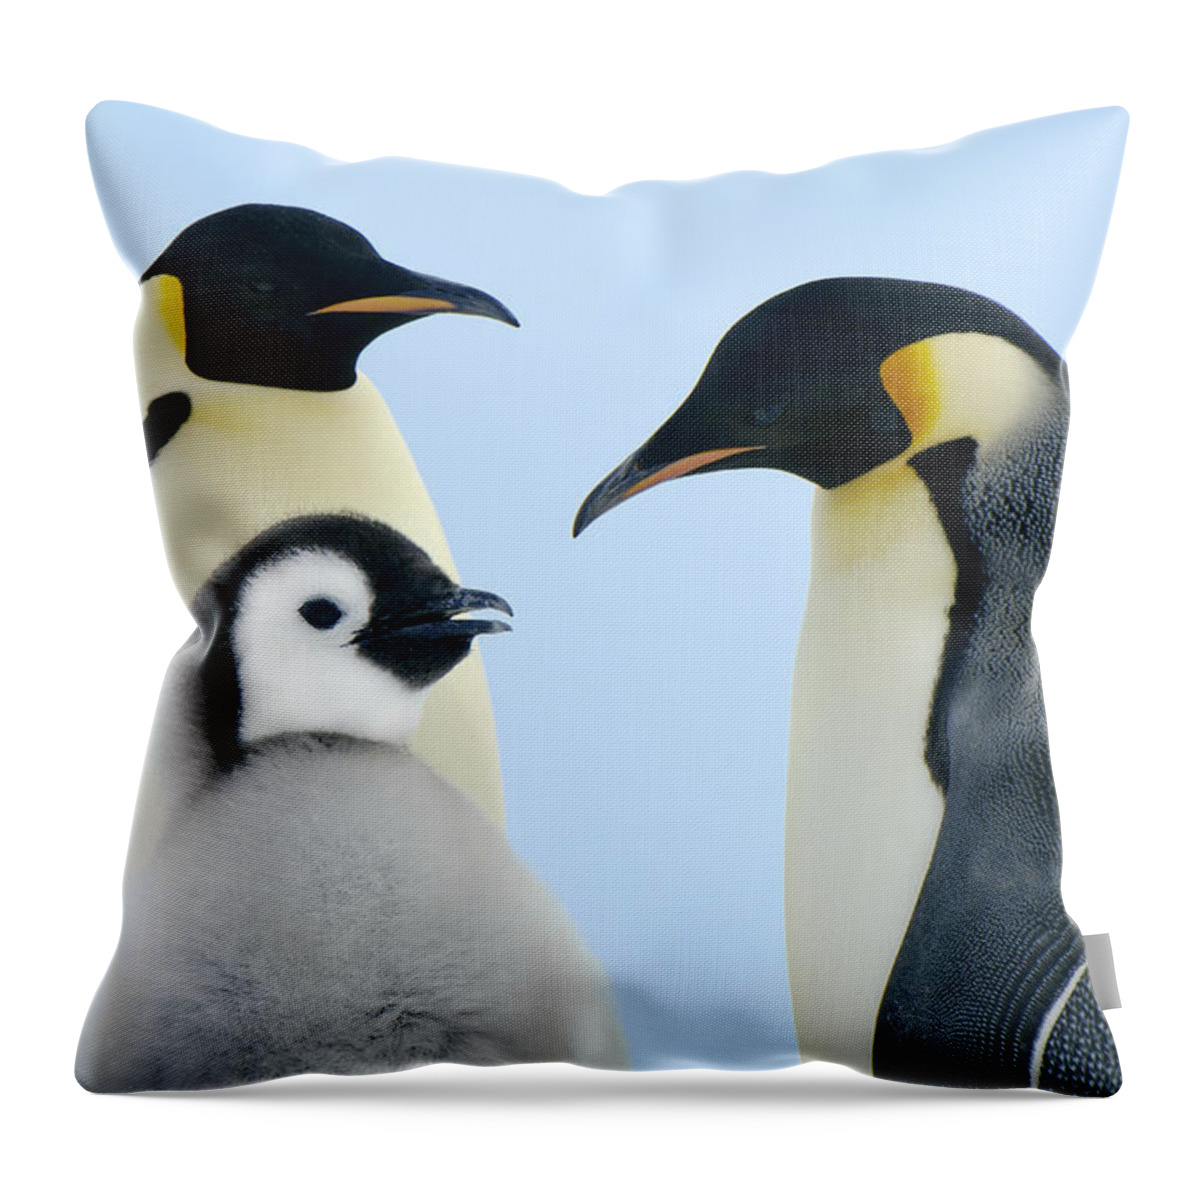 00285262 Throw Pillow featuring the photograph Emperor Penguin Aptenodytes Forsteri by Jan Vermeer